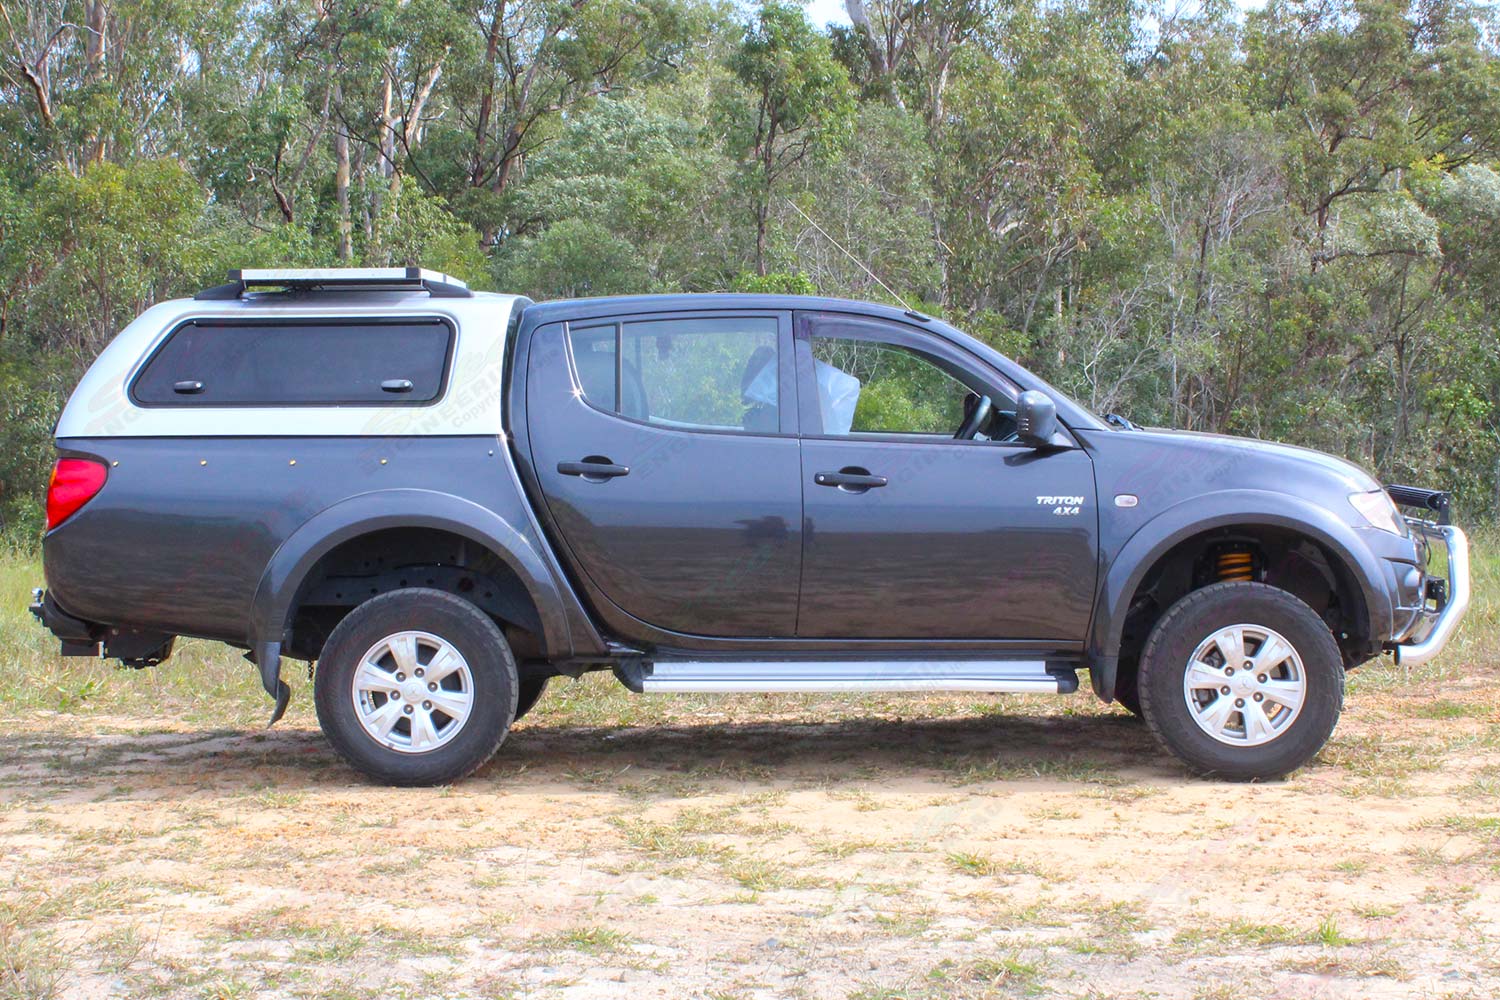 Right side view of a ML Mitsubishi Triton dual cab fitted out with a constant load 40mm Ironman lift kit